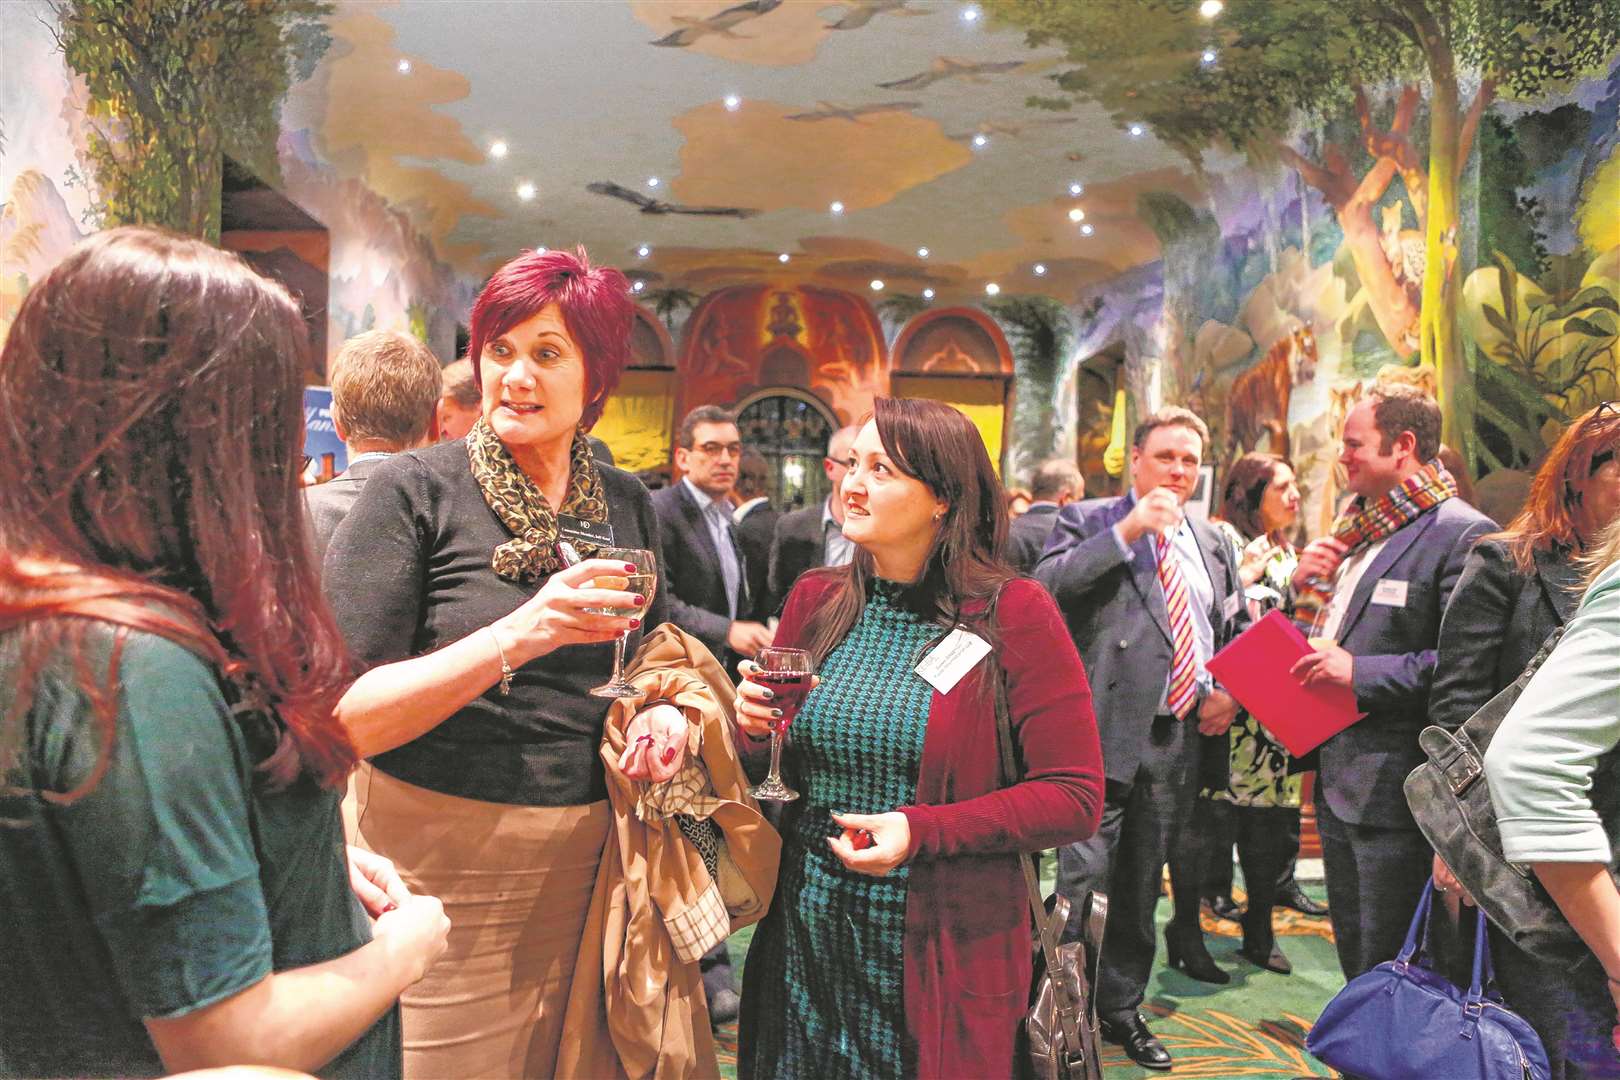 The KEiBA launch was held at the Port Lympne Hotel